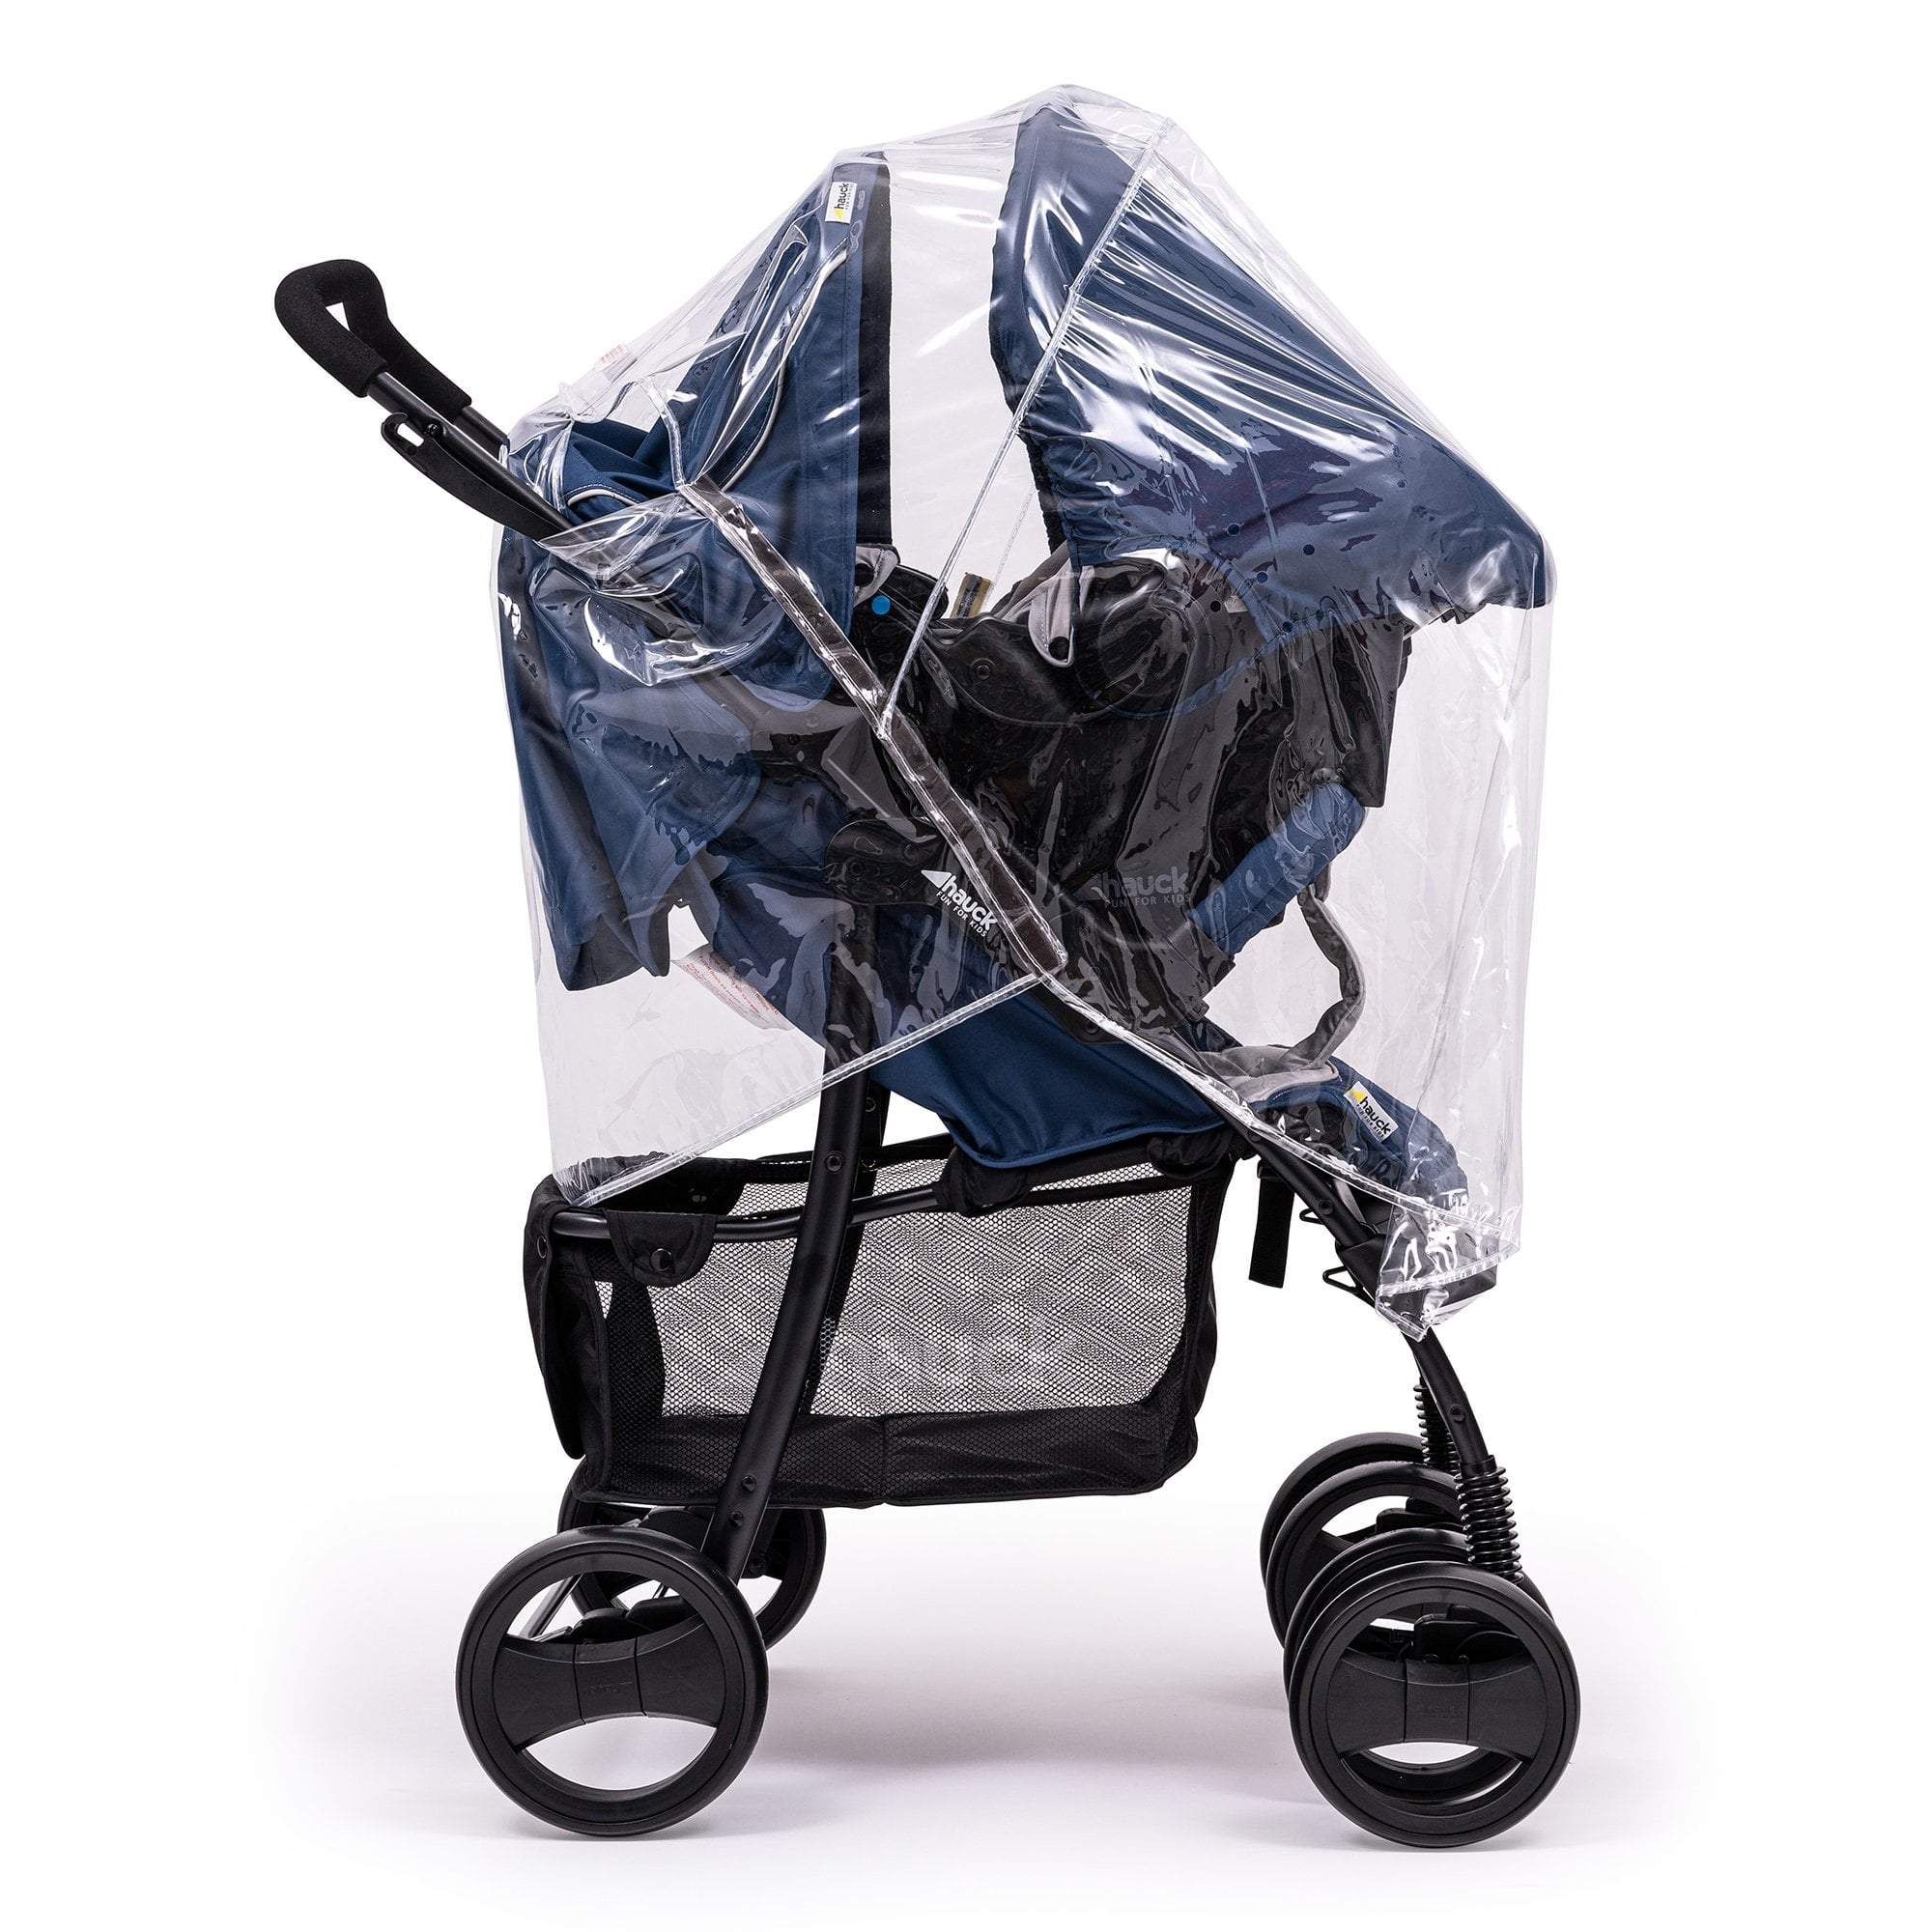 Travel System Raincover Compatible with Quax - Fits All Models - For Your Little One